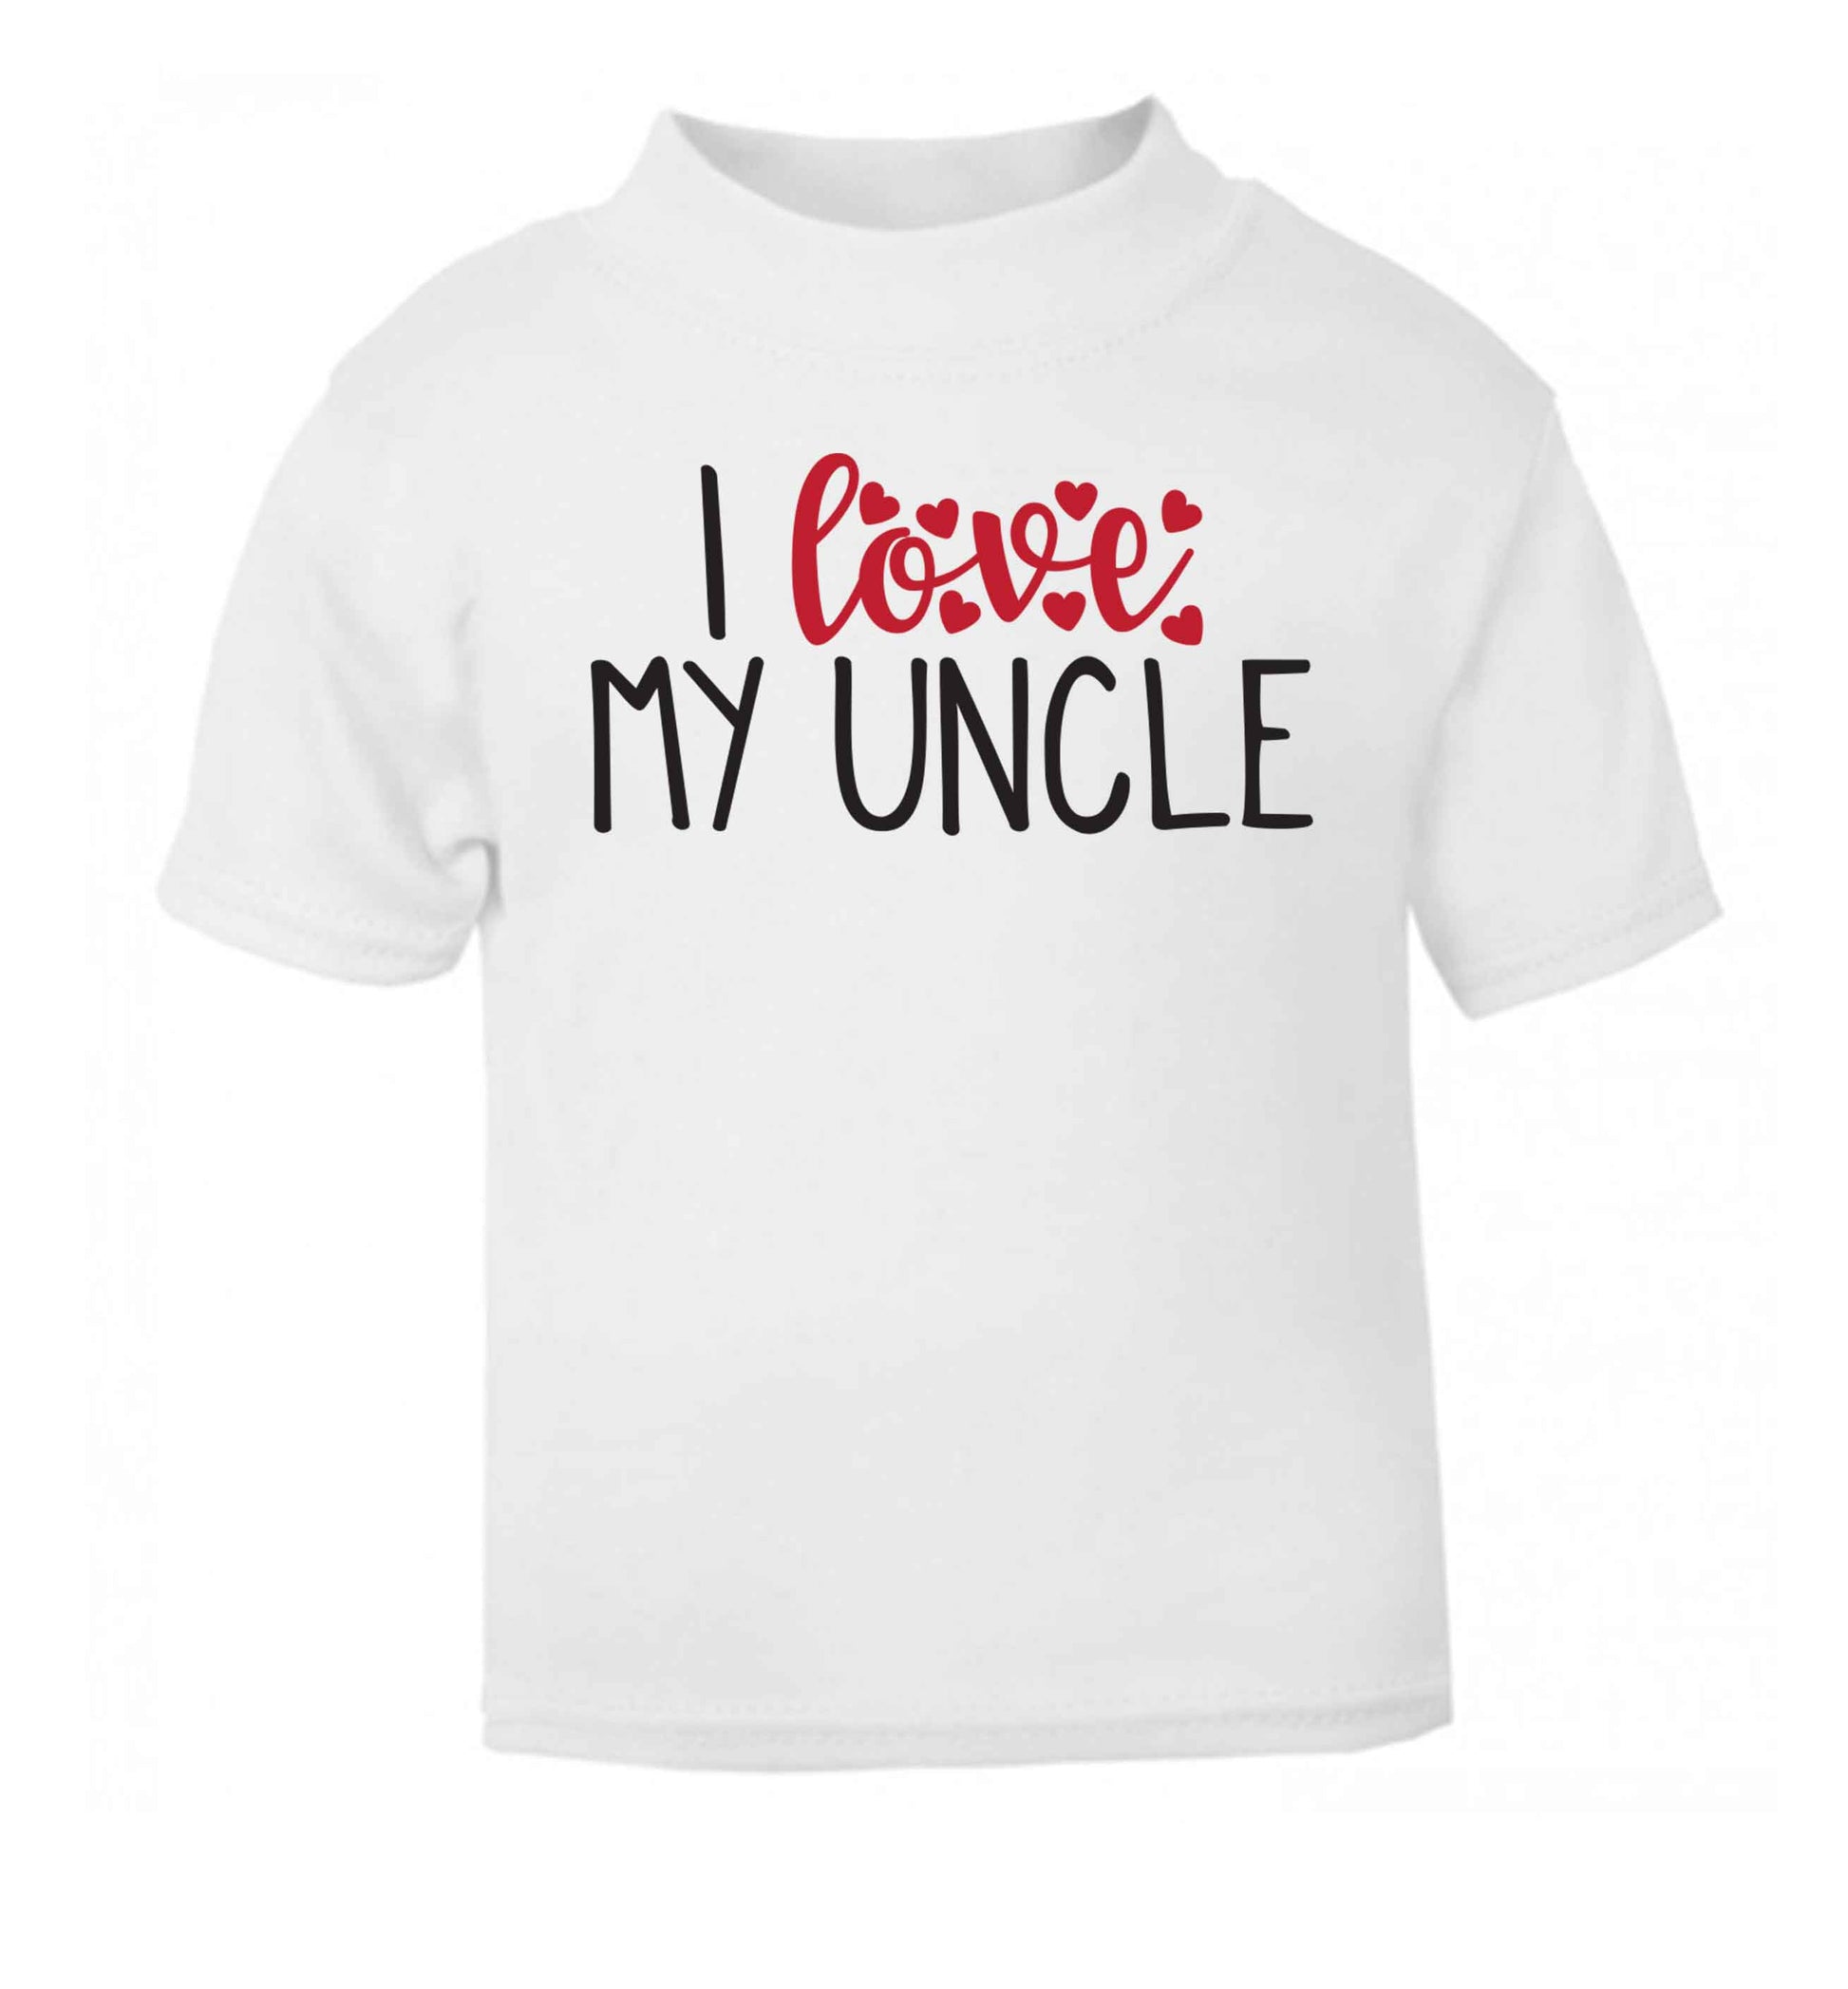 I love my uncle white Baby Toddler Tshirt 2 Years